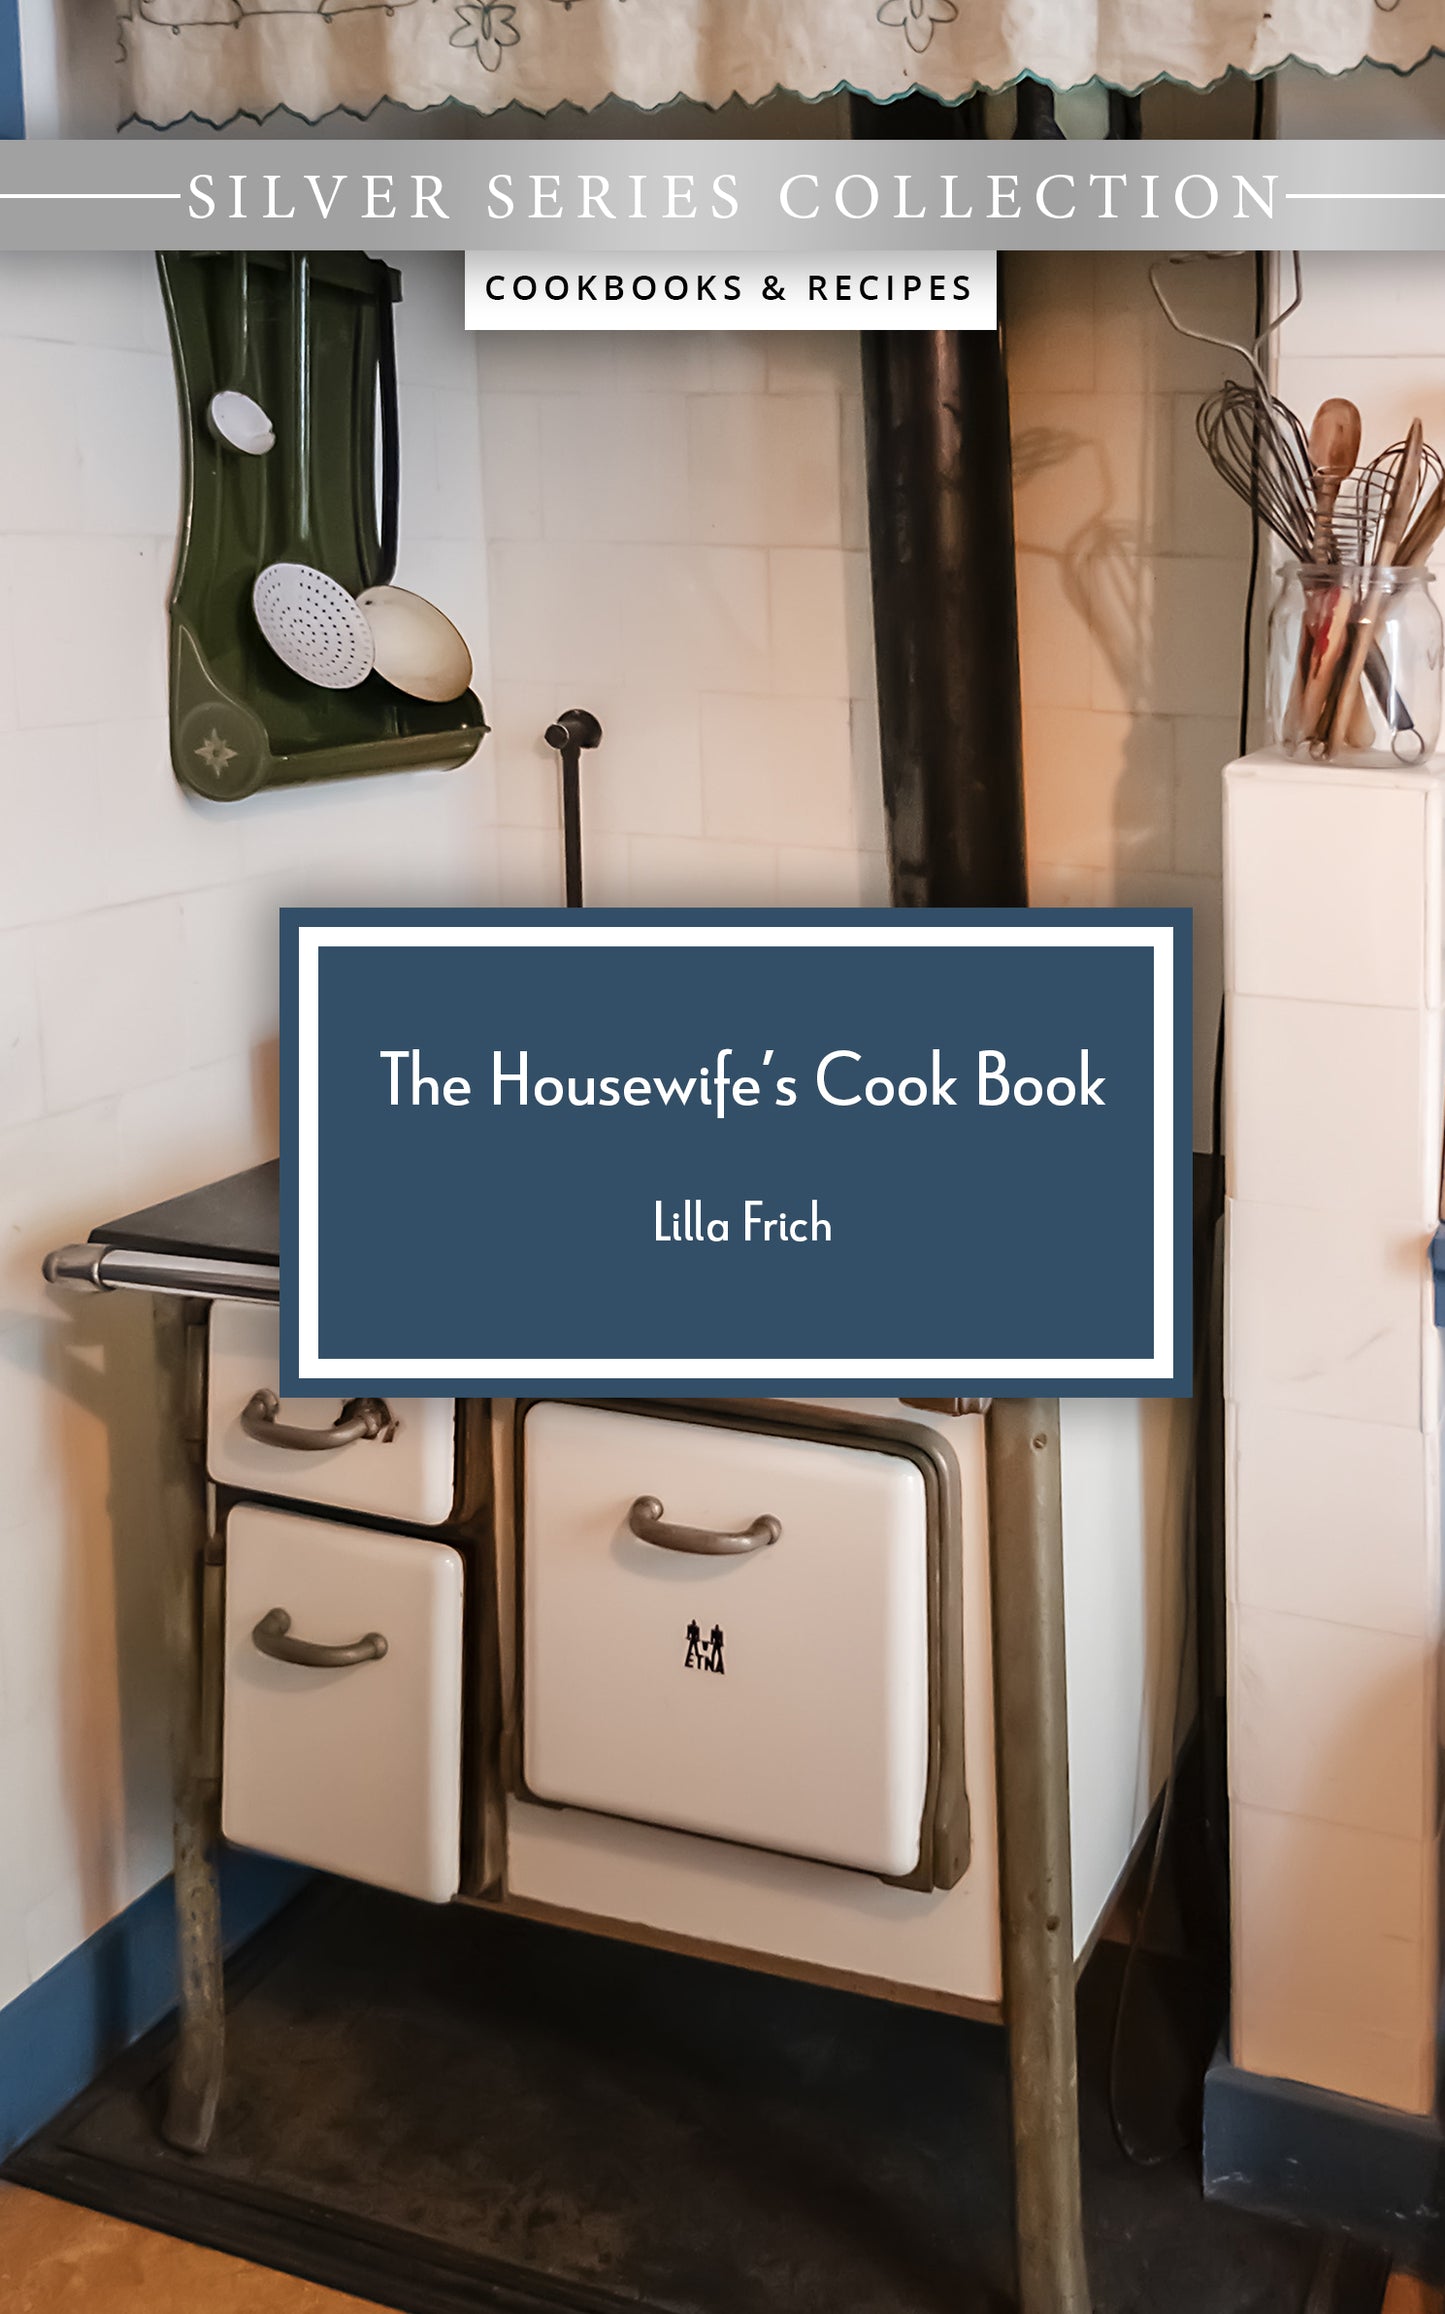 The Housewife's Cook Book